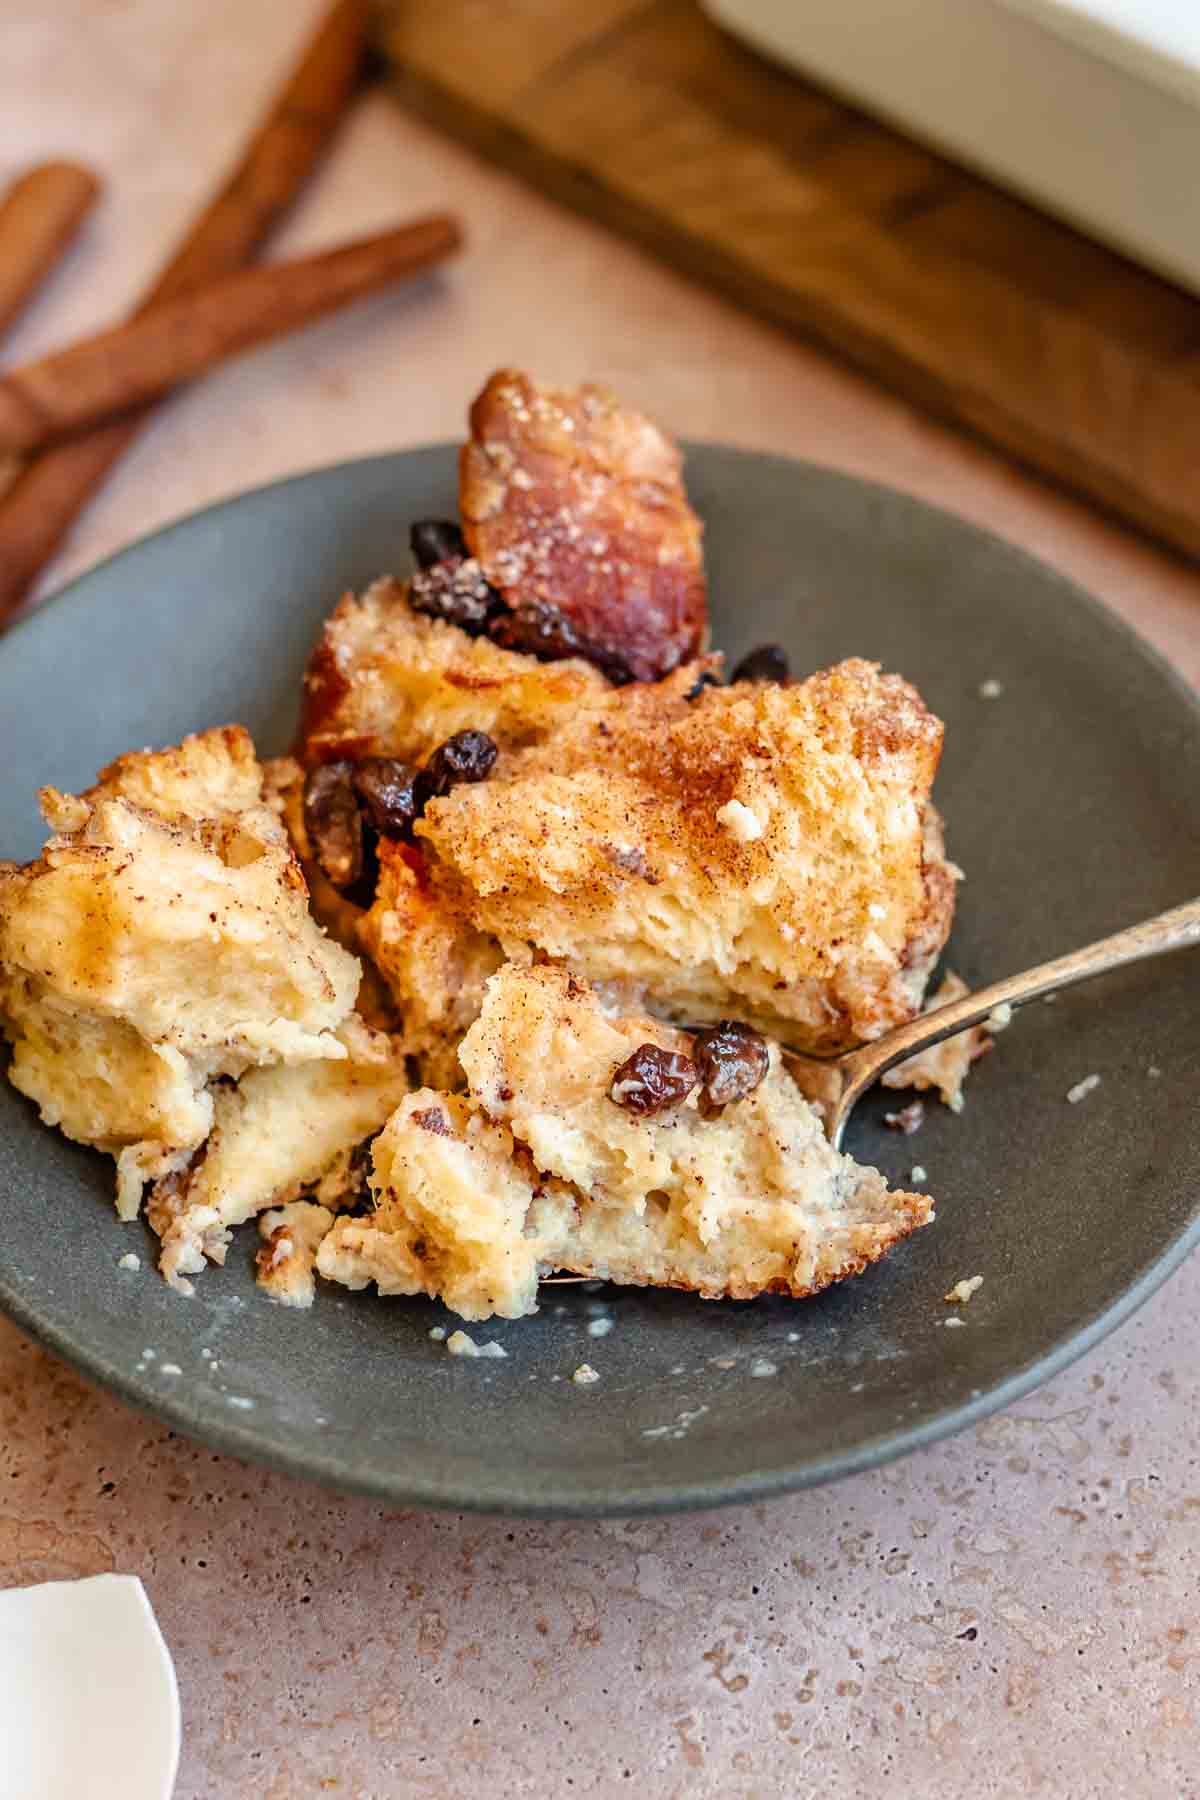 Cinnamon bread pudding in a bowl with a spoon.